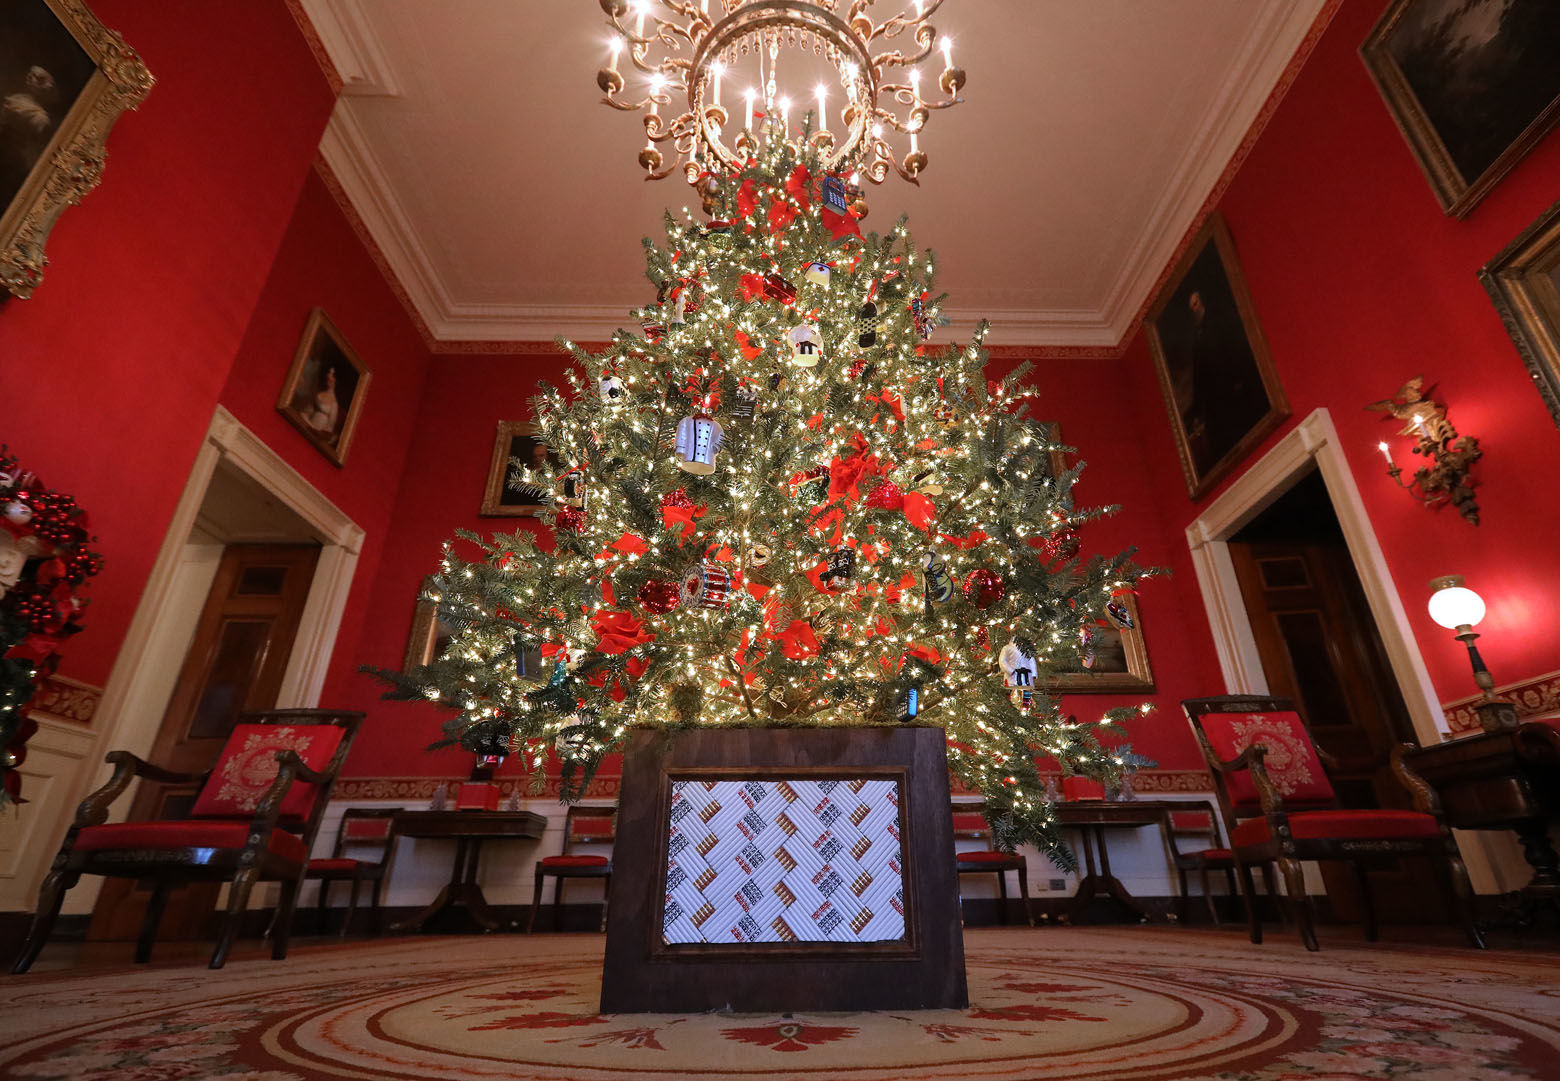 WASHINGTON, DC - NOVEMBER 26: Carrying first lady Melania Trump's 'Be Best' initiative, the Red Room is decorated to 'celebrate children through the dÃ©cor, which displays ways in which children can excel in their own path' at the White House November 26, 2018 in Washington, DC. The 2018 theme of the White House holiday decorations is 'American Treasures,' and features patriotic displays highlighting the country's 'unique heritage.' The White House expects to host 100 open houses and more than 30,000 guests who will tour the topiary trees, architectural models of major U.S. cities, the Gold Star family tree and national monuments in gingerbread. (Photo by Chip Somodevilla/Getty Images)